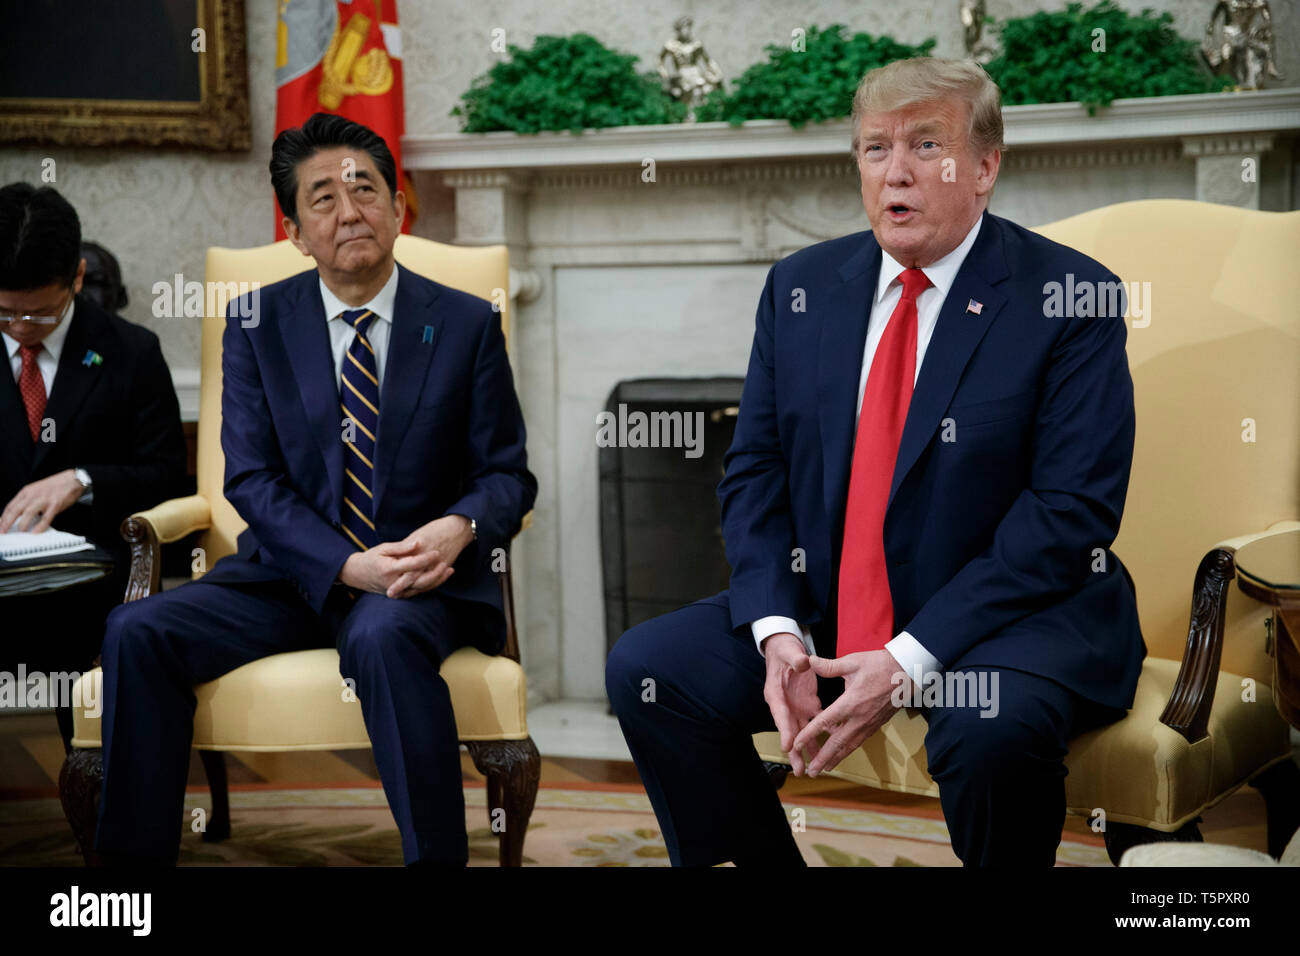 Washington, DC, USA. 26th Apr, 2019. US President Donald J. Trump meets with Japanese Prime Minister Shinzo Abe in the Oval Office of the White House in Washington, DC, USA, 26 April 2019. President Trump is hosting a dinner for Prime Minister Abe and his wife celebrating the First Lady's 49th birthday Credit: Shawn Thew/Pool via CNP | usage worldwide Credit: dpa/Alamy Live News Stock Photo